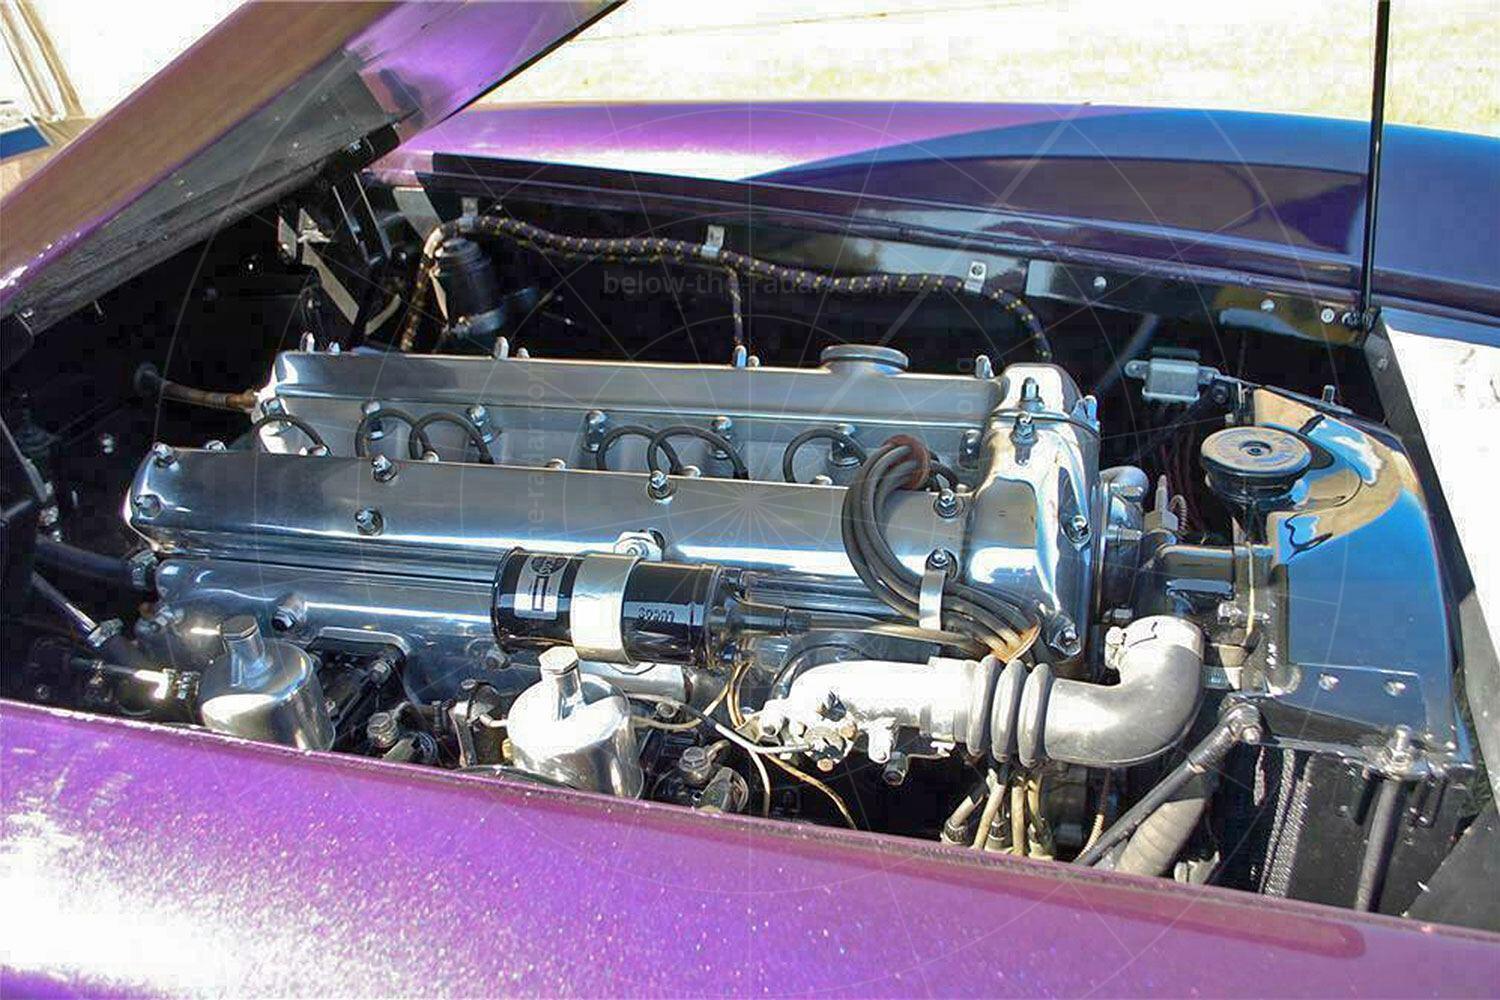 The Flajole Forerunner's engine bay Pic: Barrett-Jackson | The Flajole Forerunner's engine bay